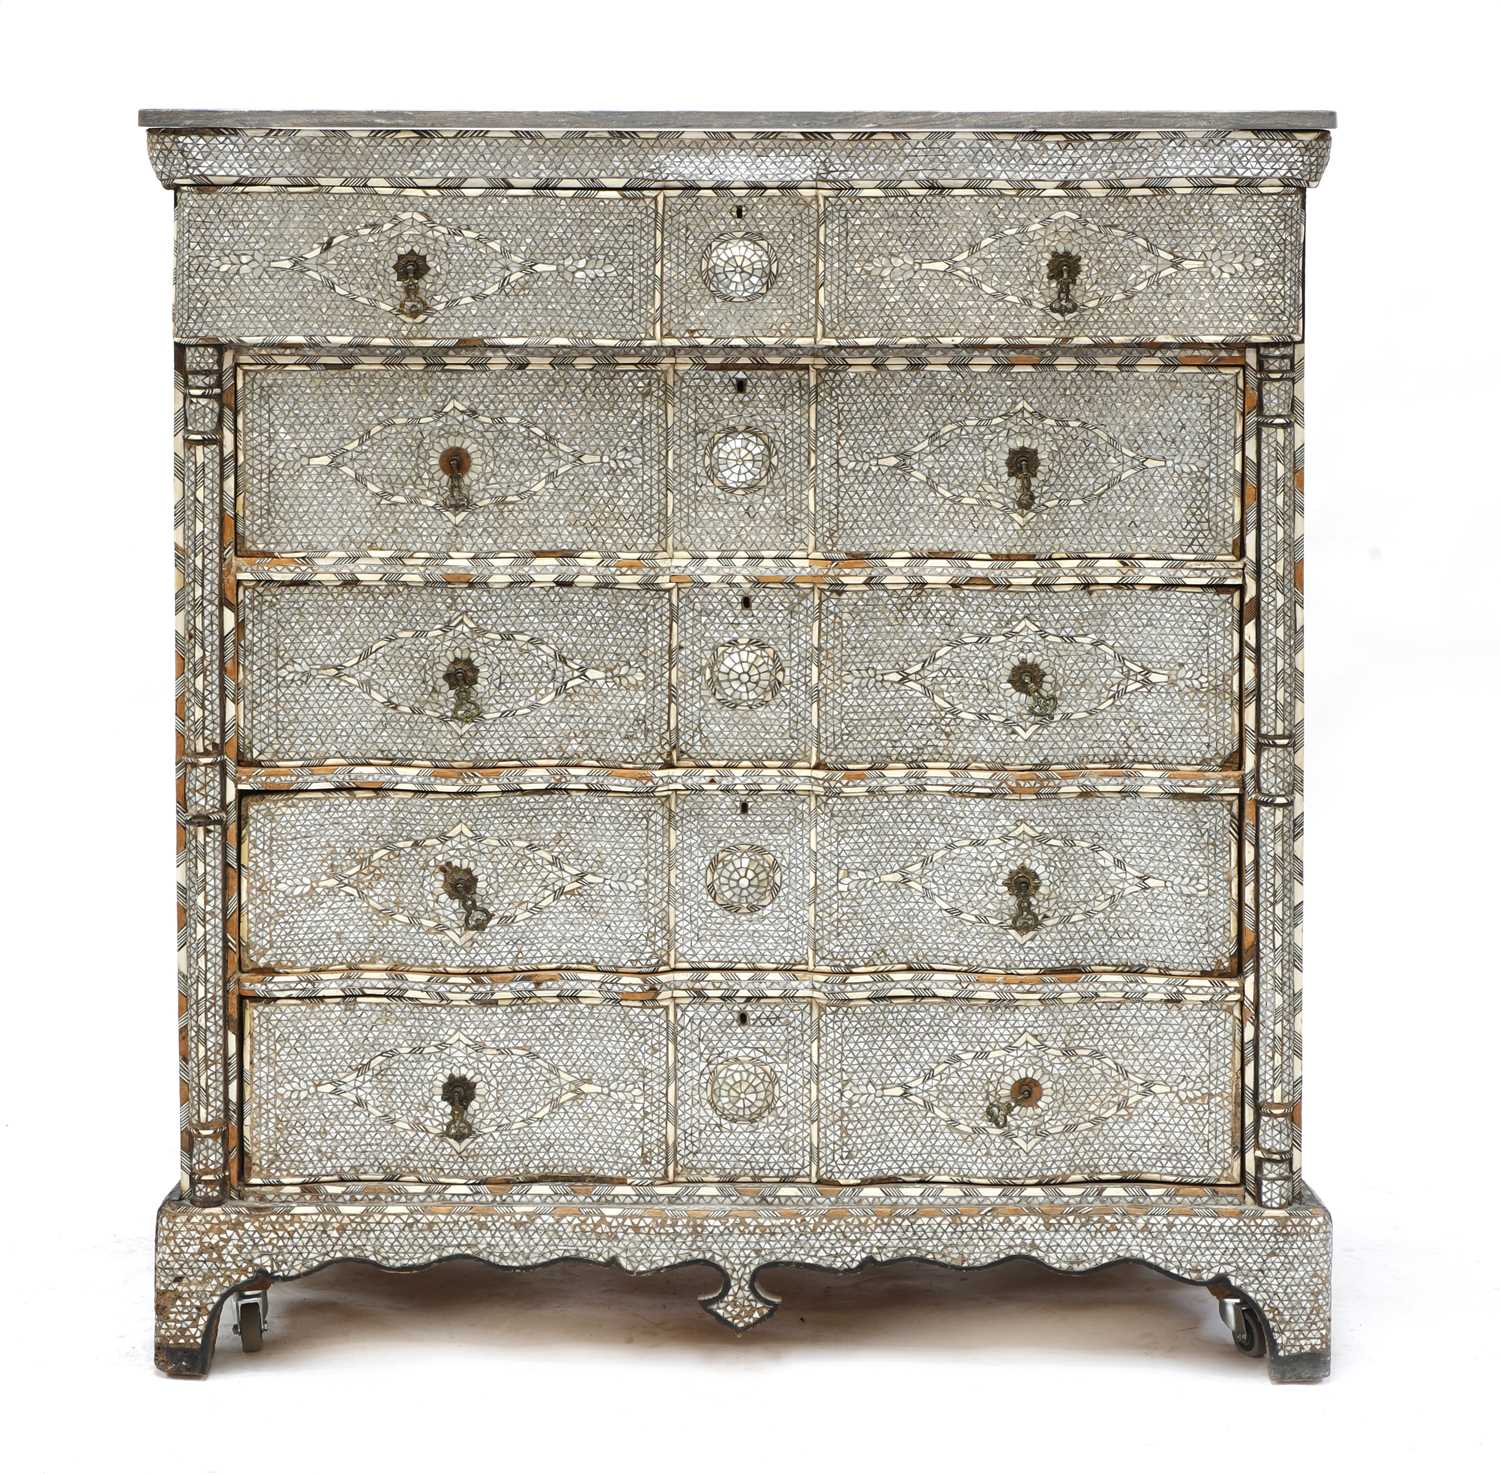 Lot 227 - A Syrian ebonised, mother-of-pearl and bone inlaid tall chest of drawers